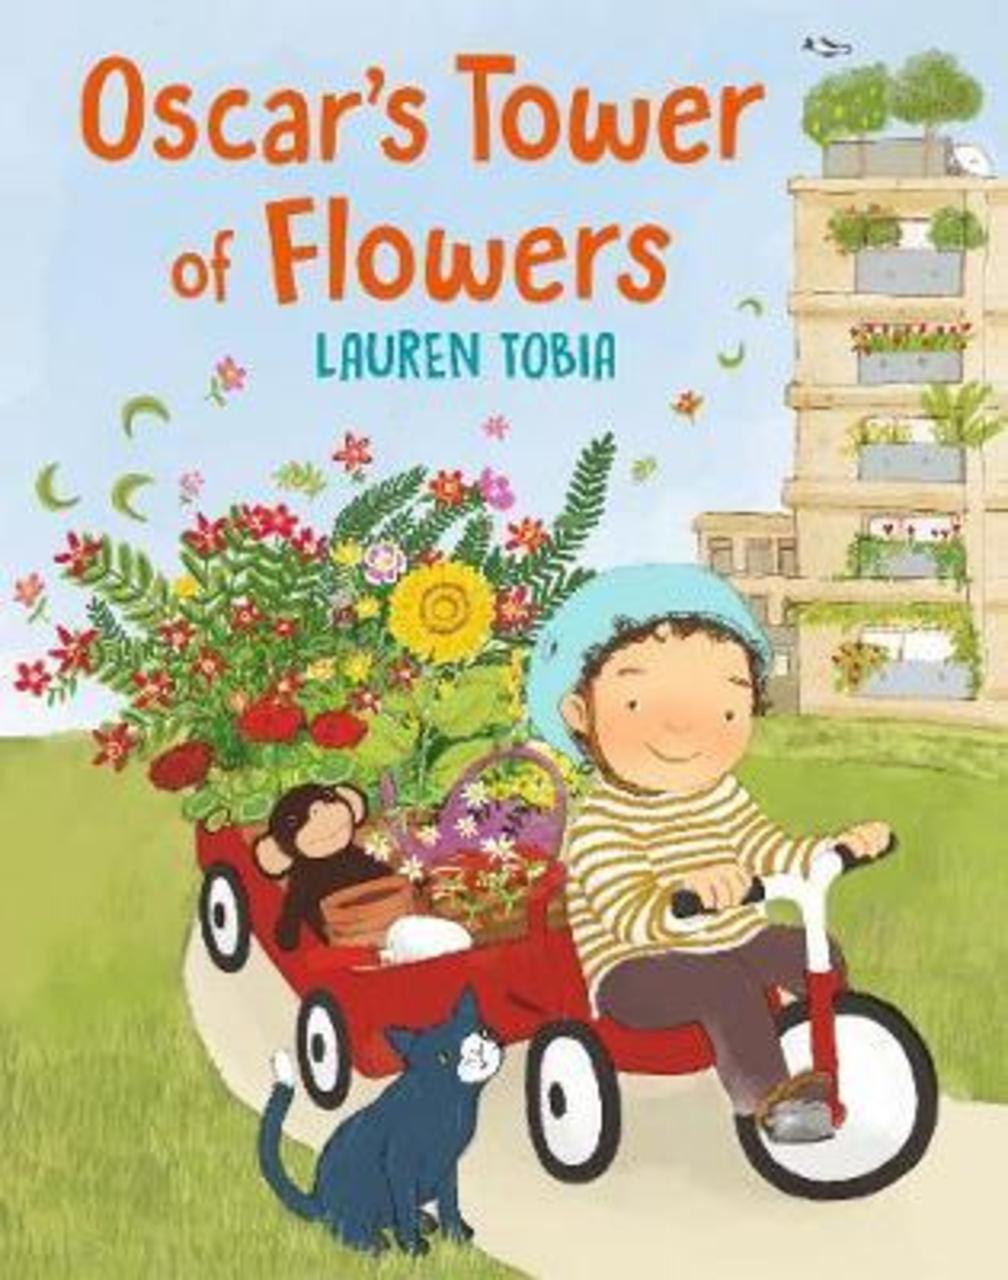 Sách - Oscar's Tower of Flowers by Lauren Tobia (UK edition, hardcover)